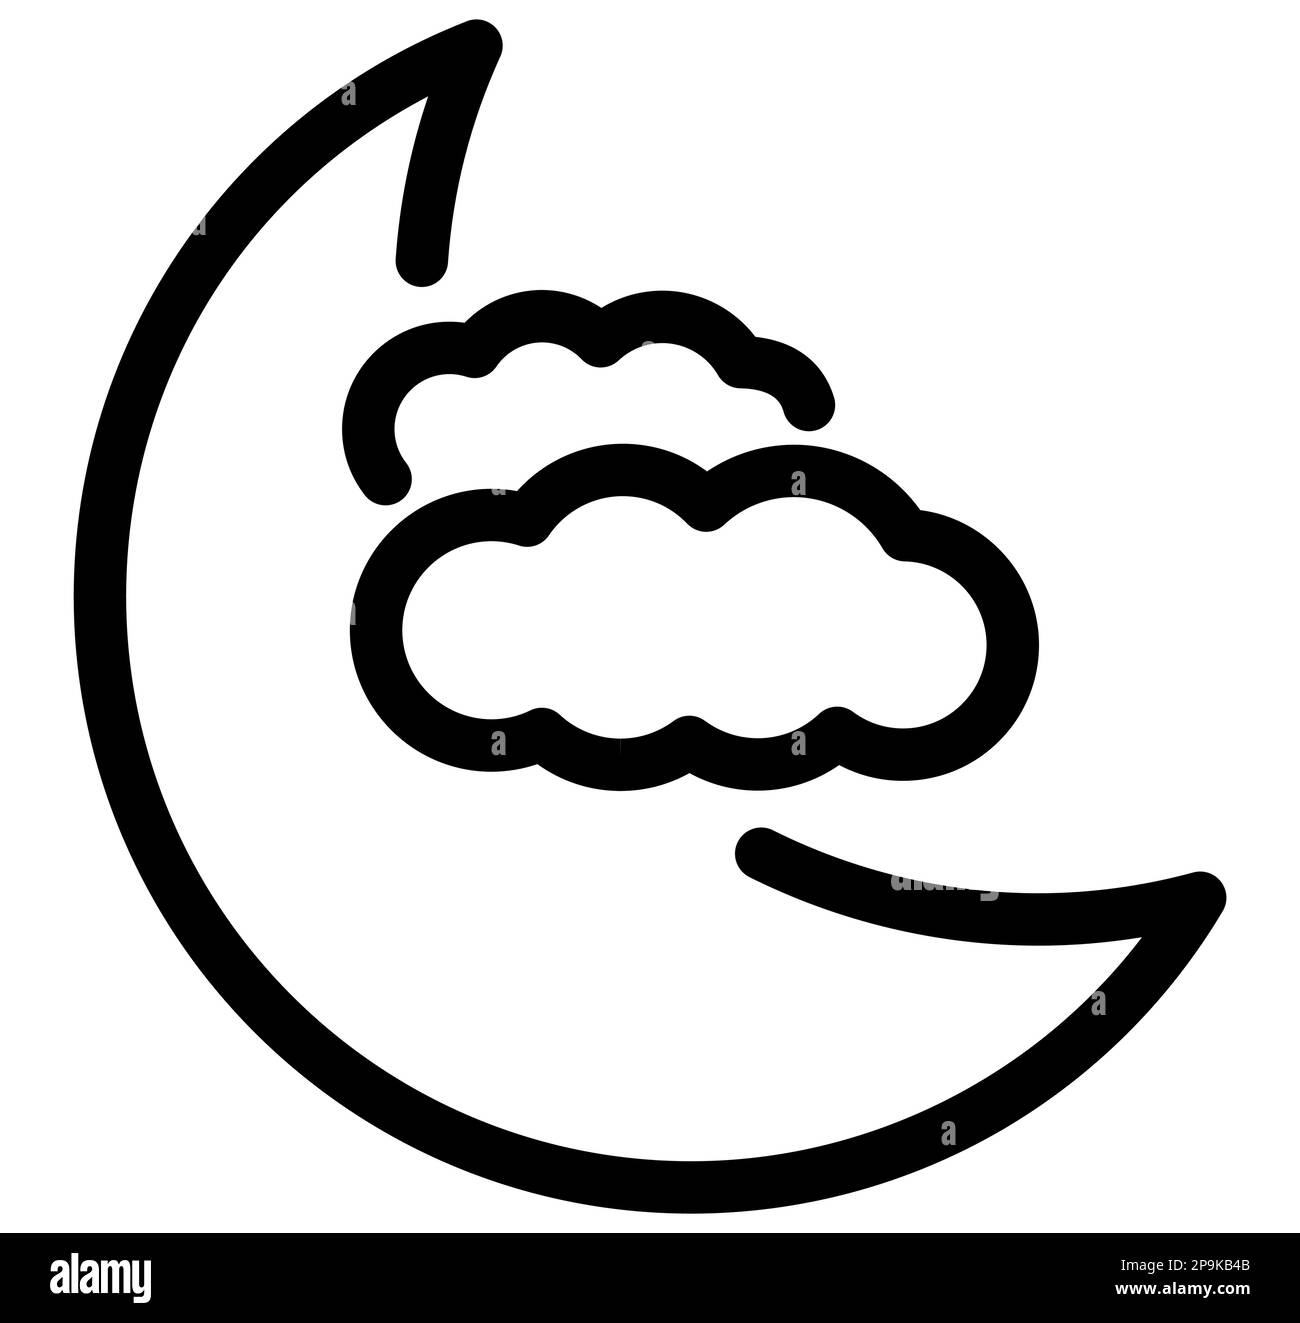 Black silhouette of half moon or waning crescent with clouds. Weather icon, cloudy sky in vector form, illustration Stock Vector